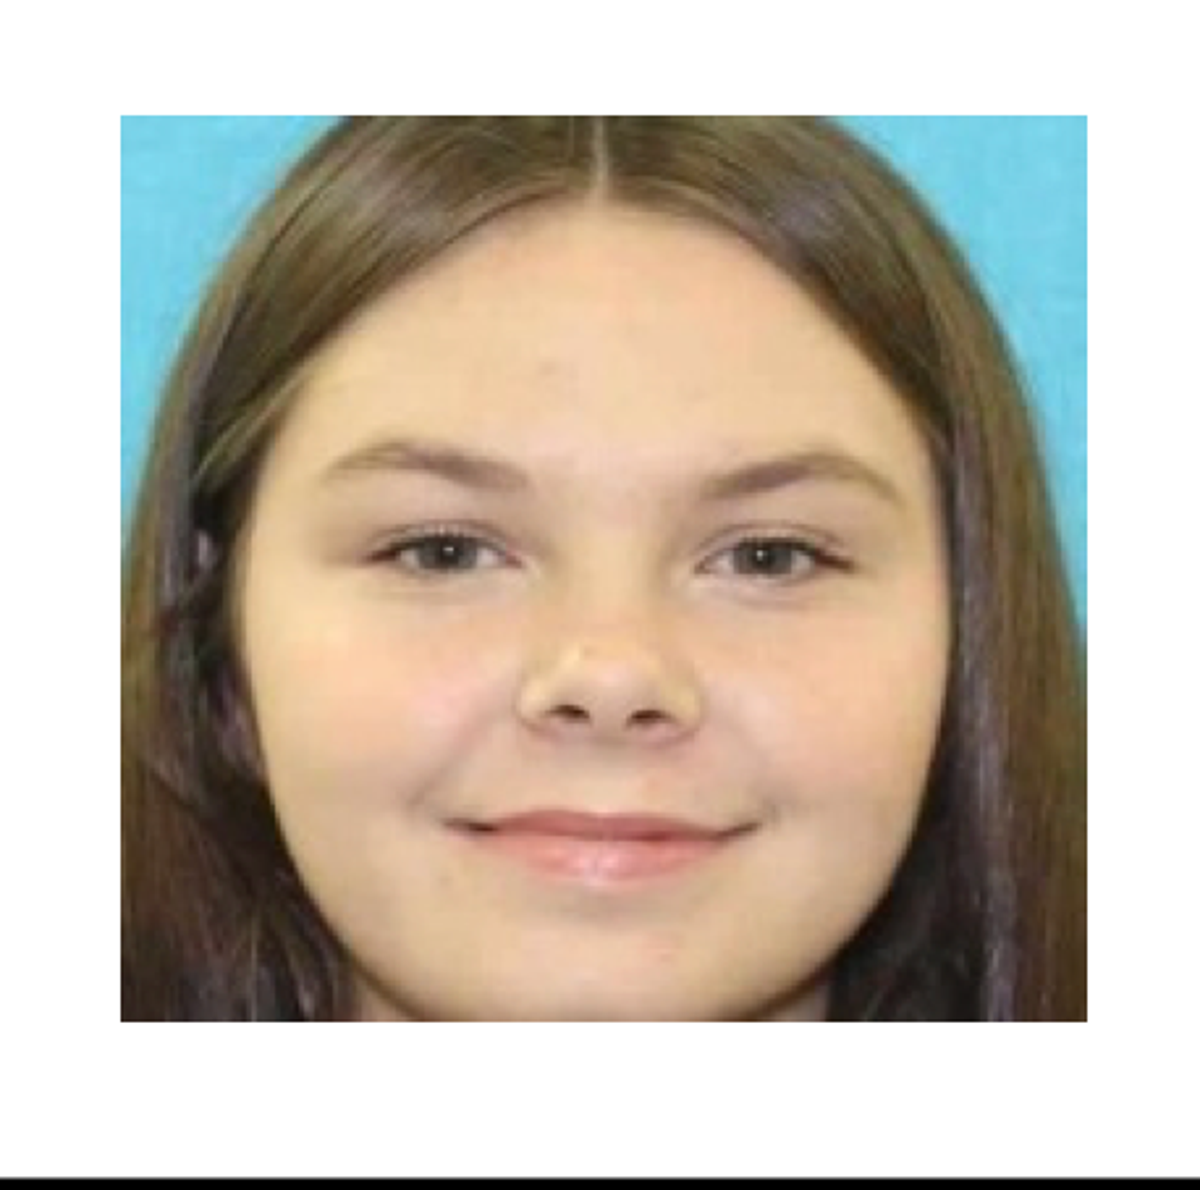 Amber Alert issued for 17-year-old missing in Texas